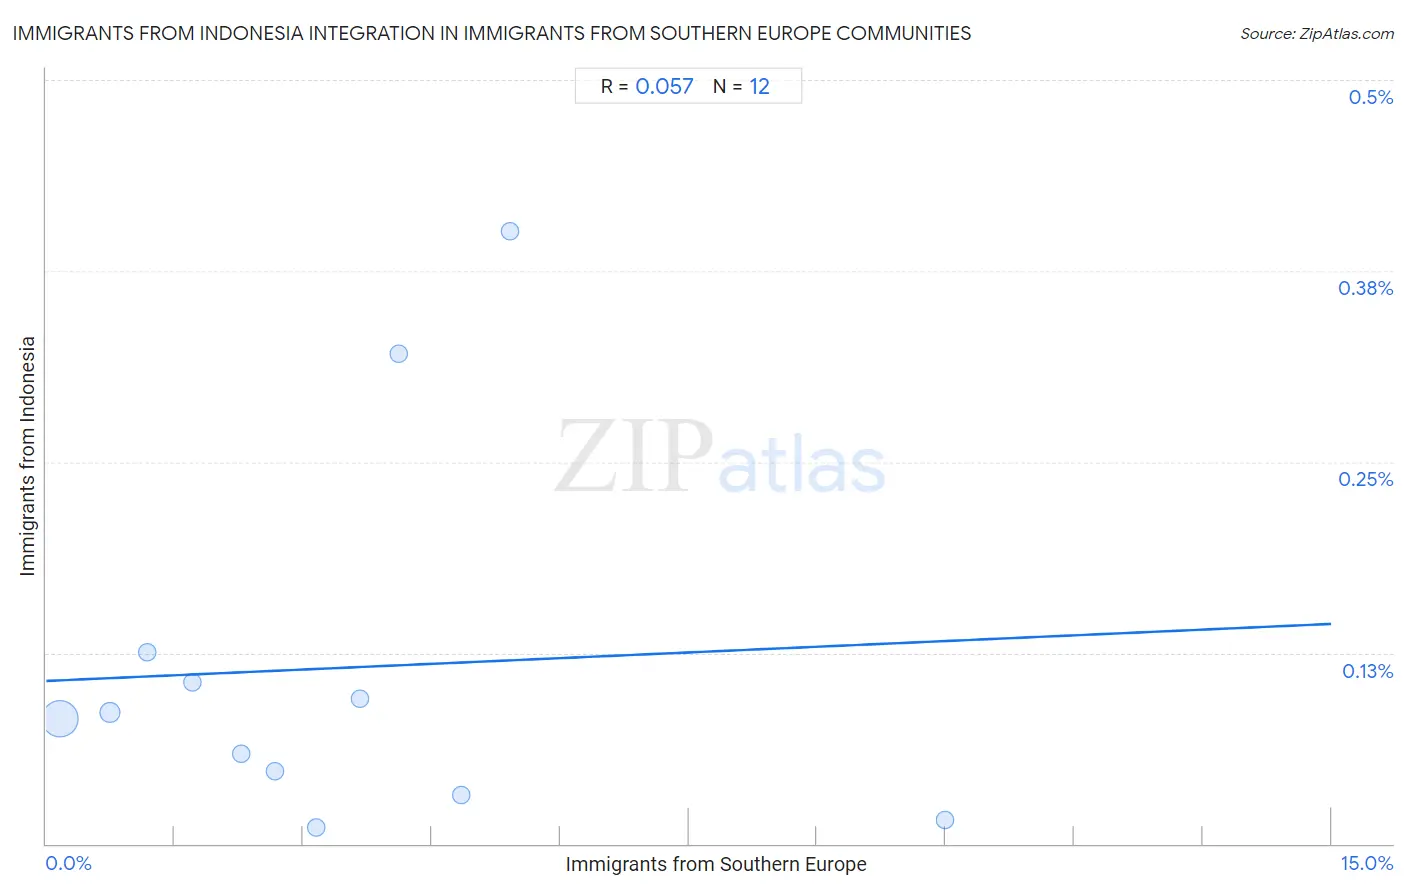 Immigrants from Southern Europe Integration in Immigrants from Indonesia Communities